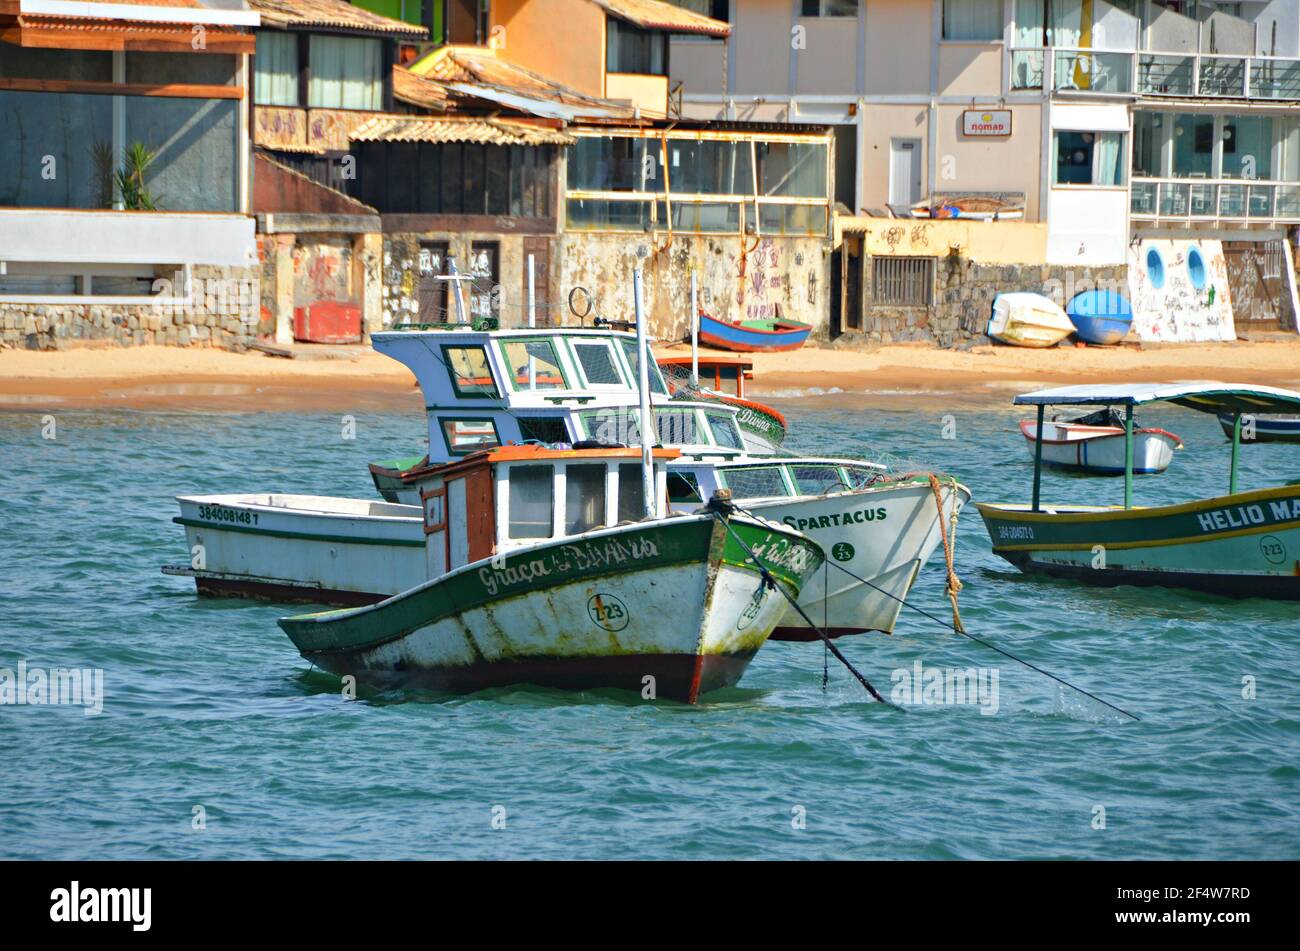 Landscape with view of traditional fishing boats on the waters of Armação dos Búzios, the renown resort town of Rio de Janeiro, Brazil. Stock Photo